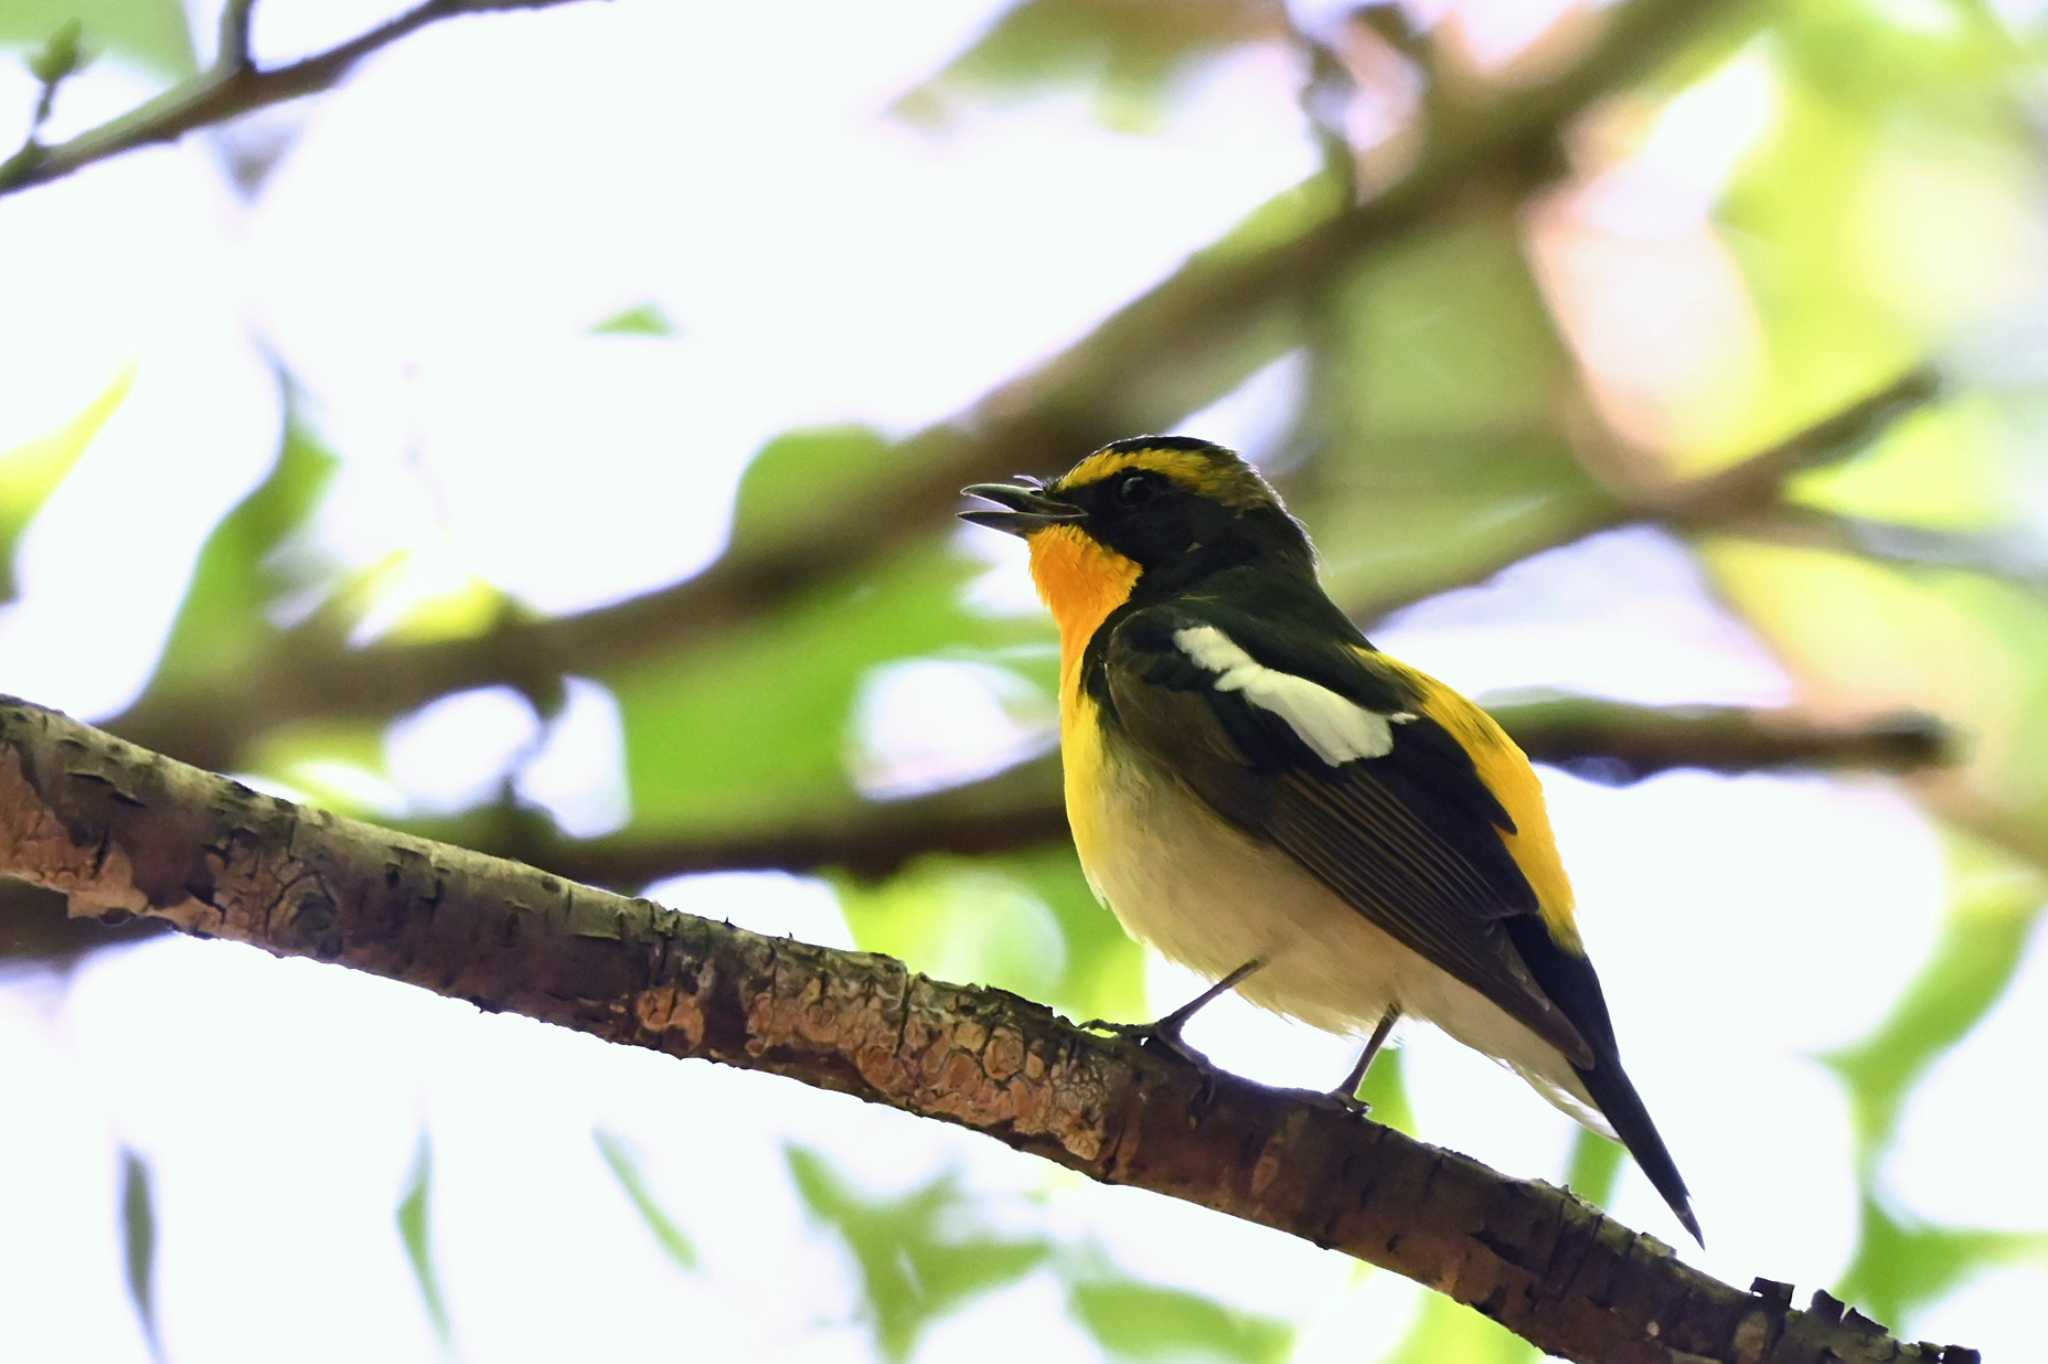 Photo of Narcissus Flycatcher at 大池公園 by ポッちゃんのパパ